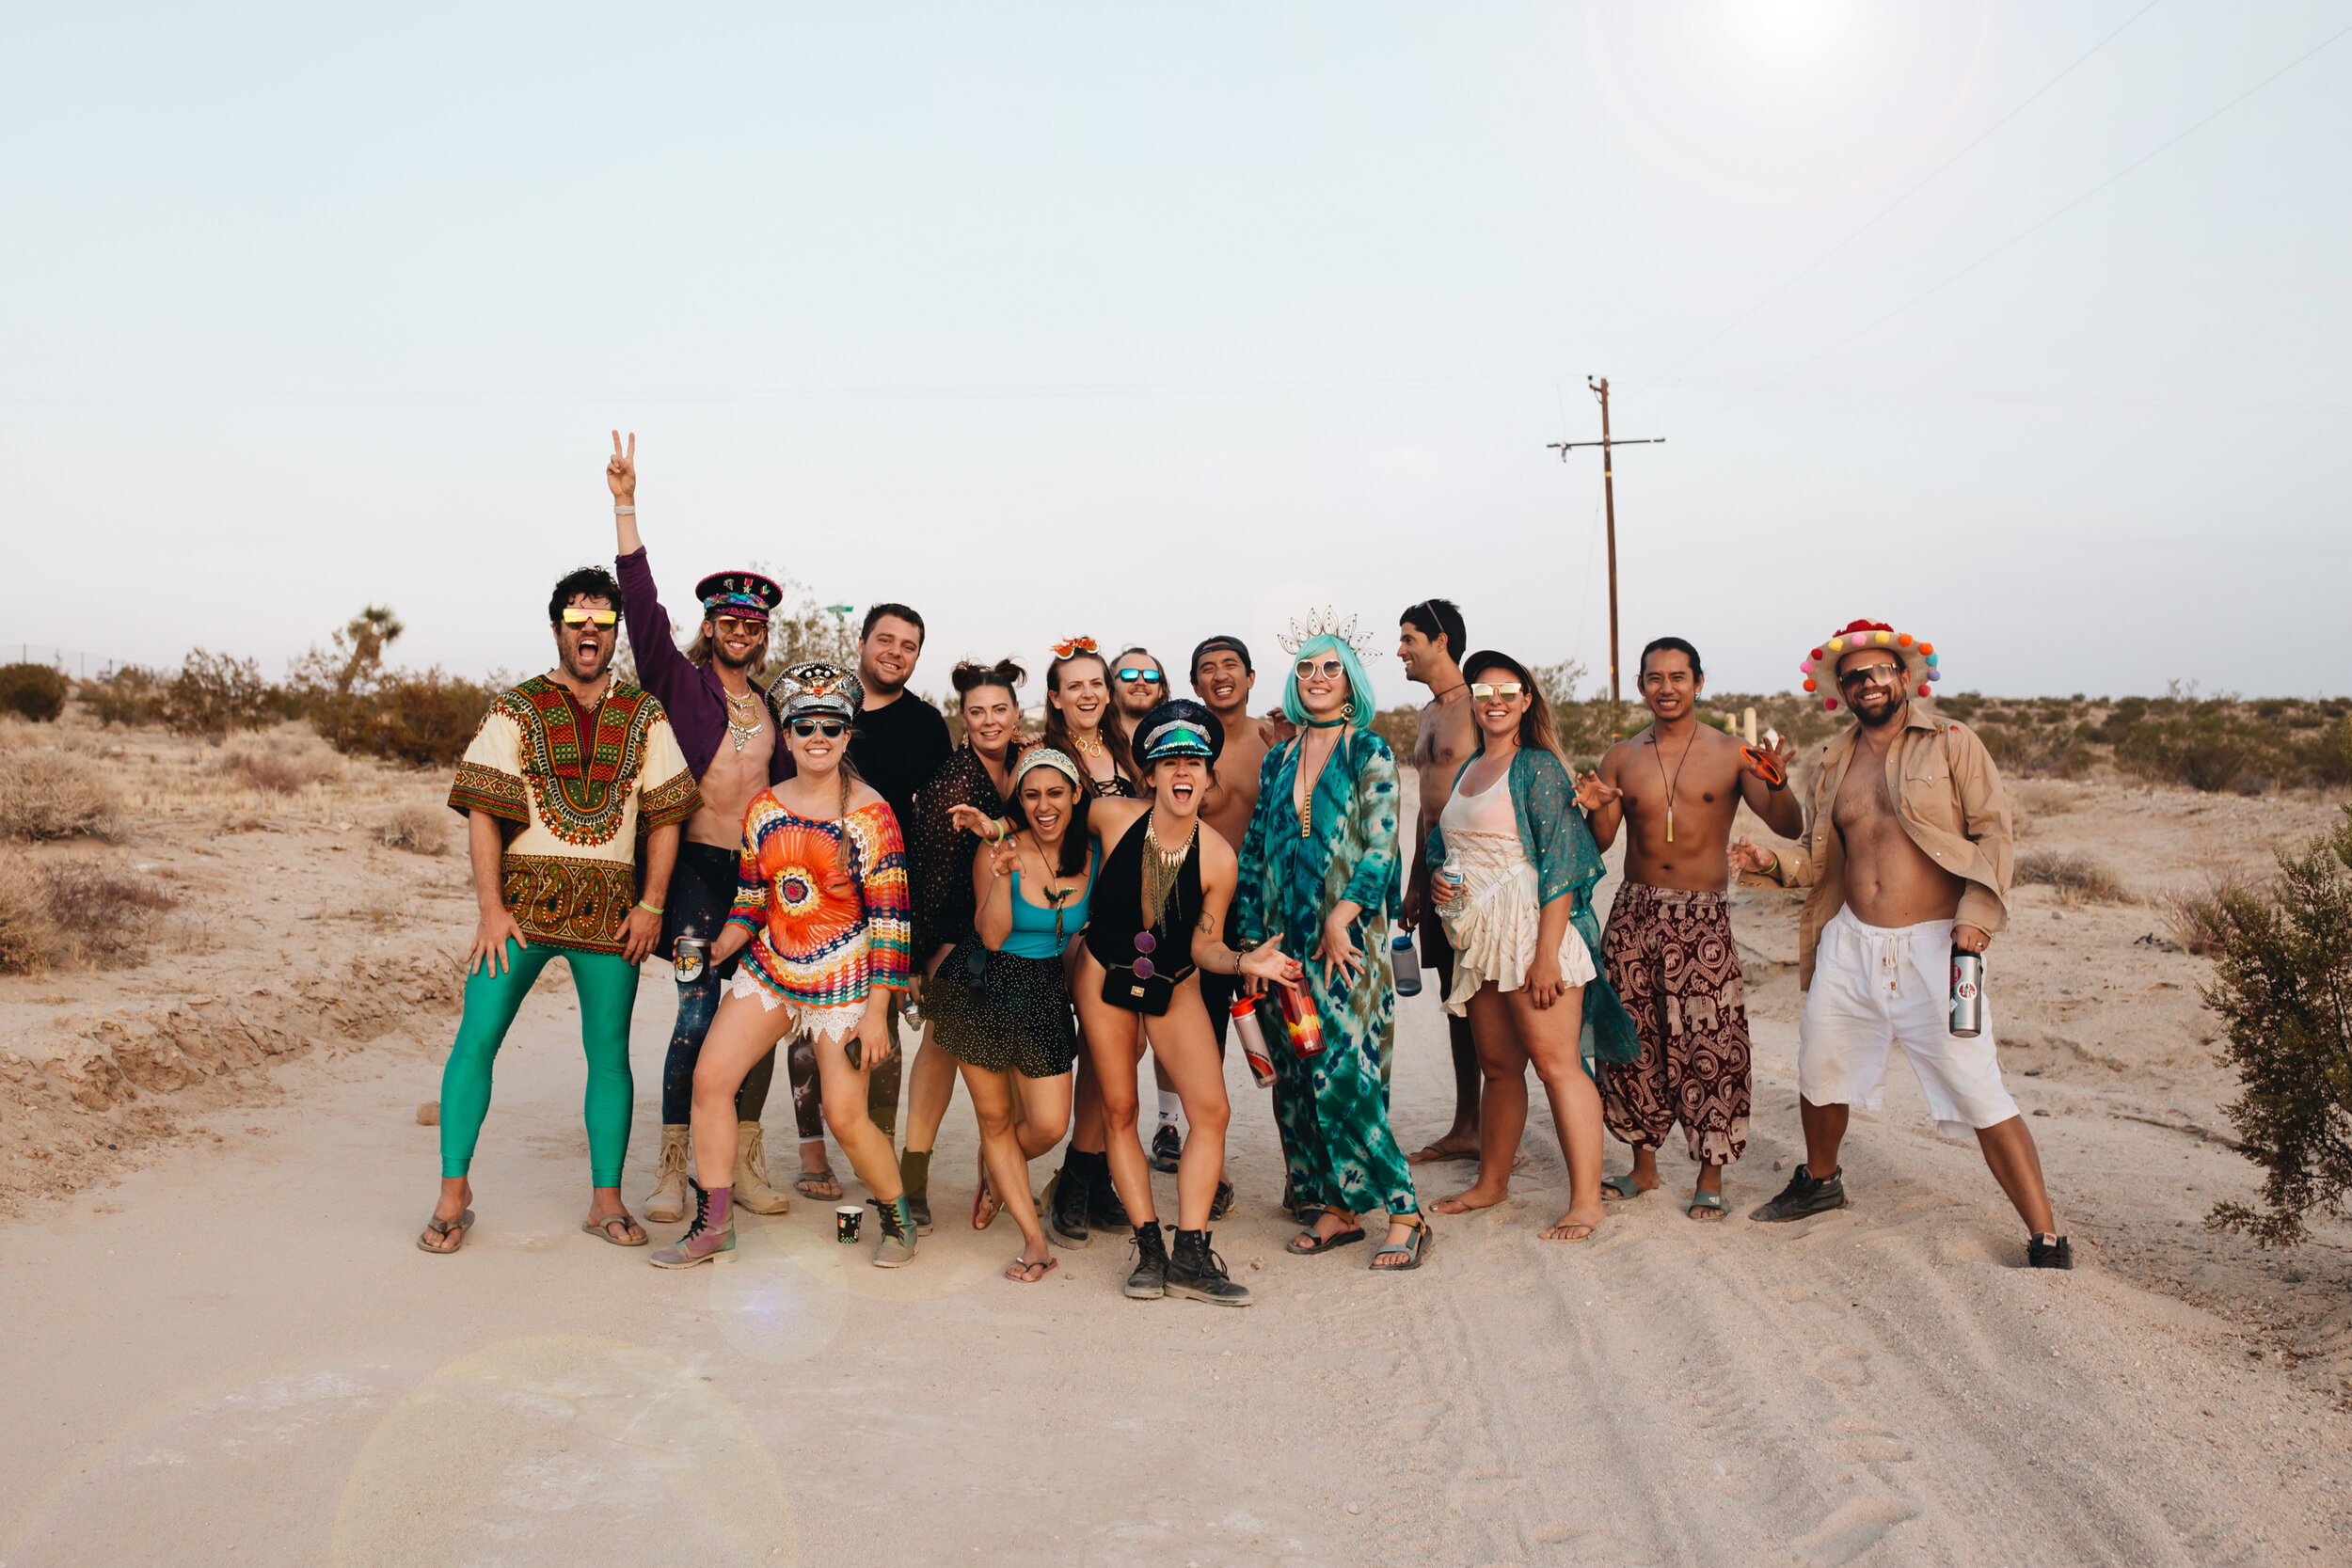 How to Create your Own Mini Burning Man Event or Theme Party